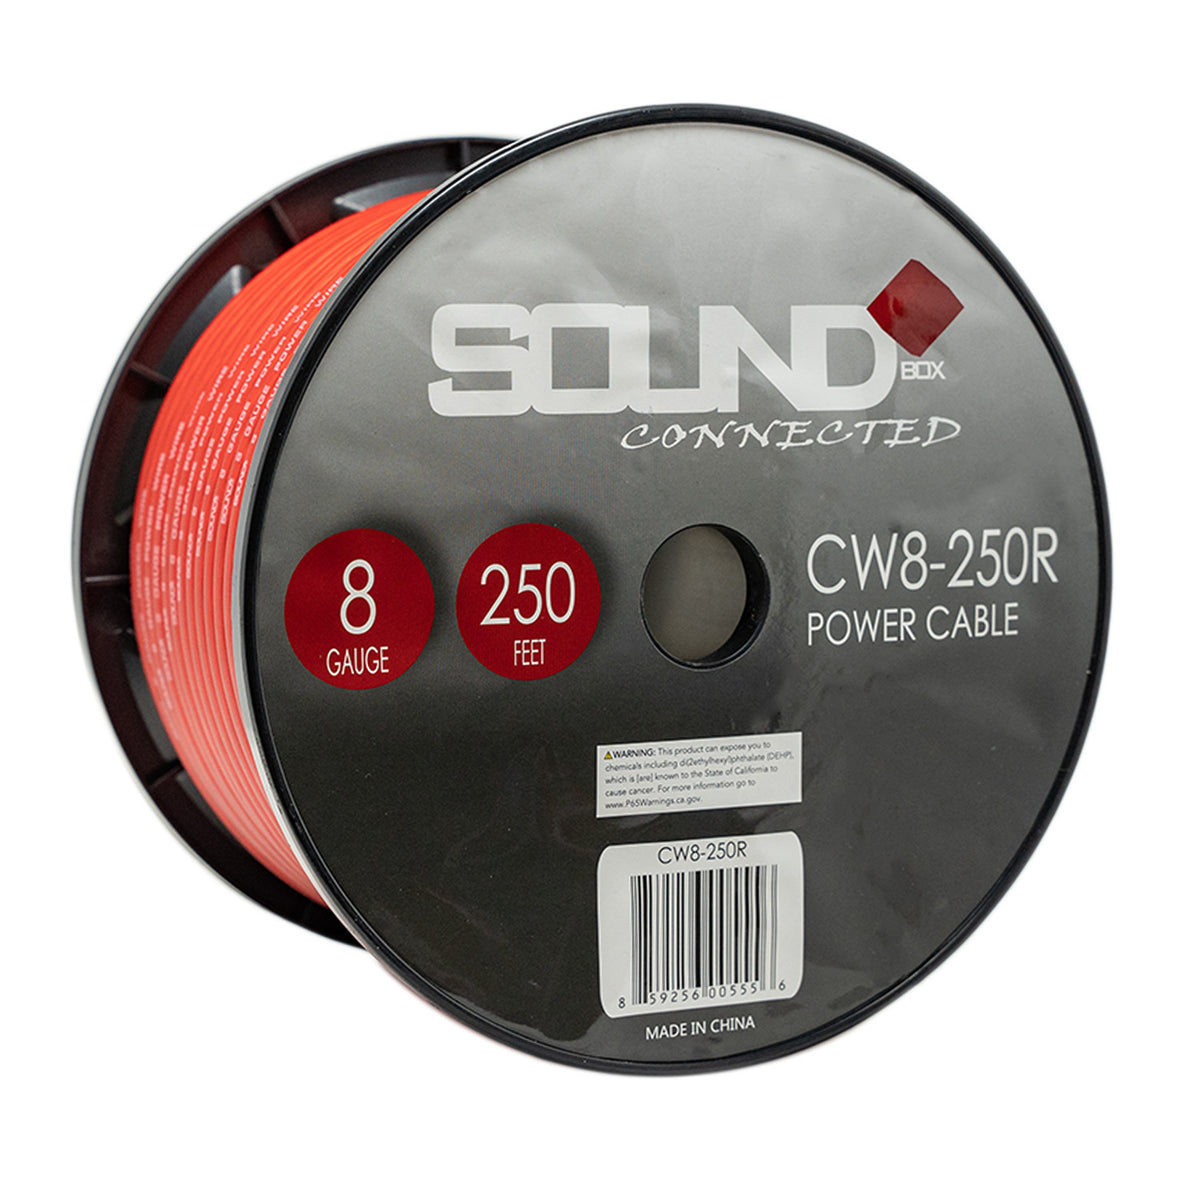 Connected 8 Gauge CCA Power Wire 250' Spool- Red